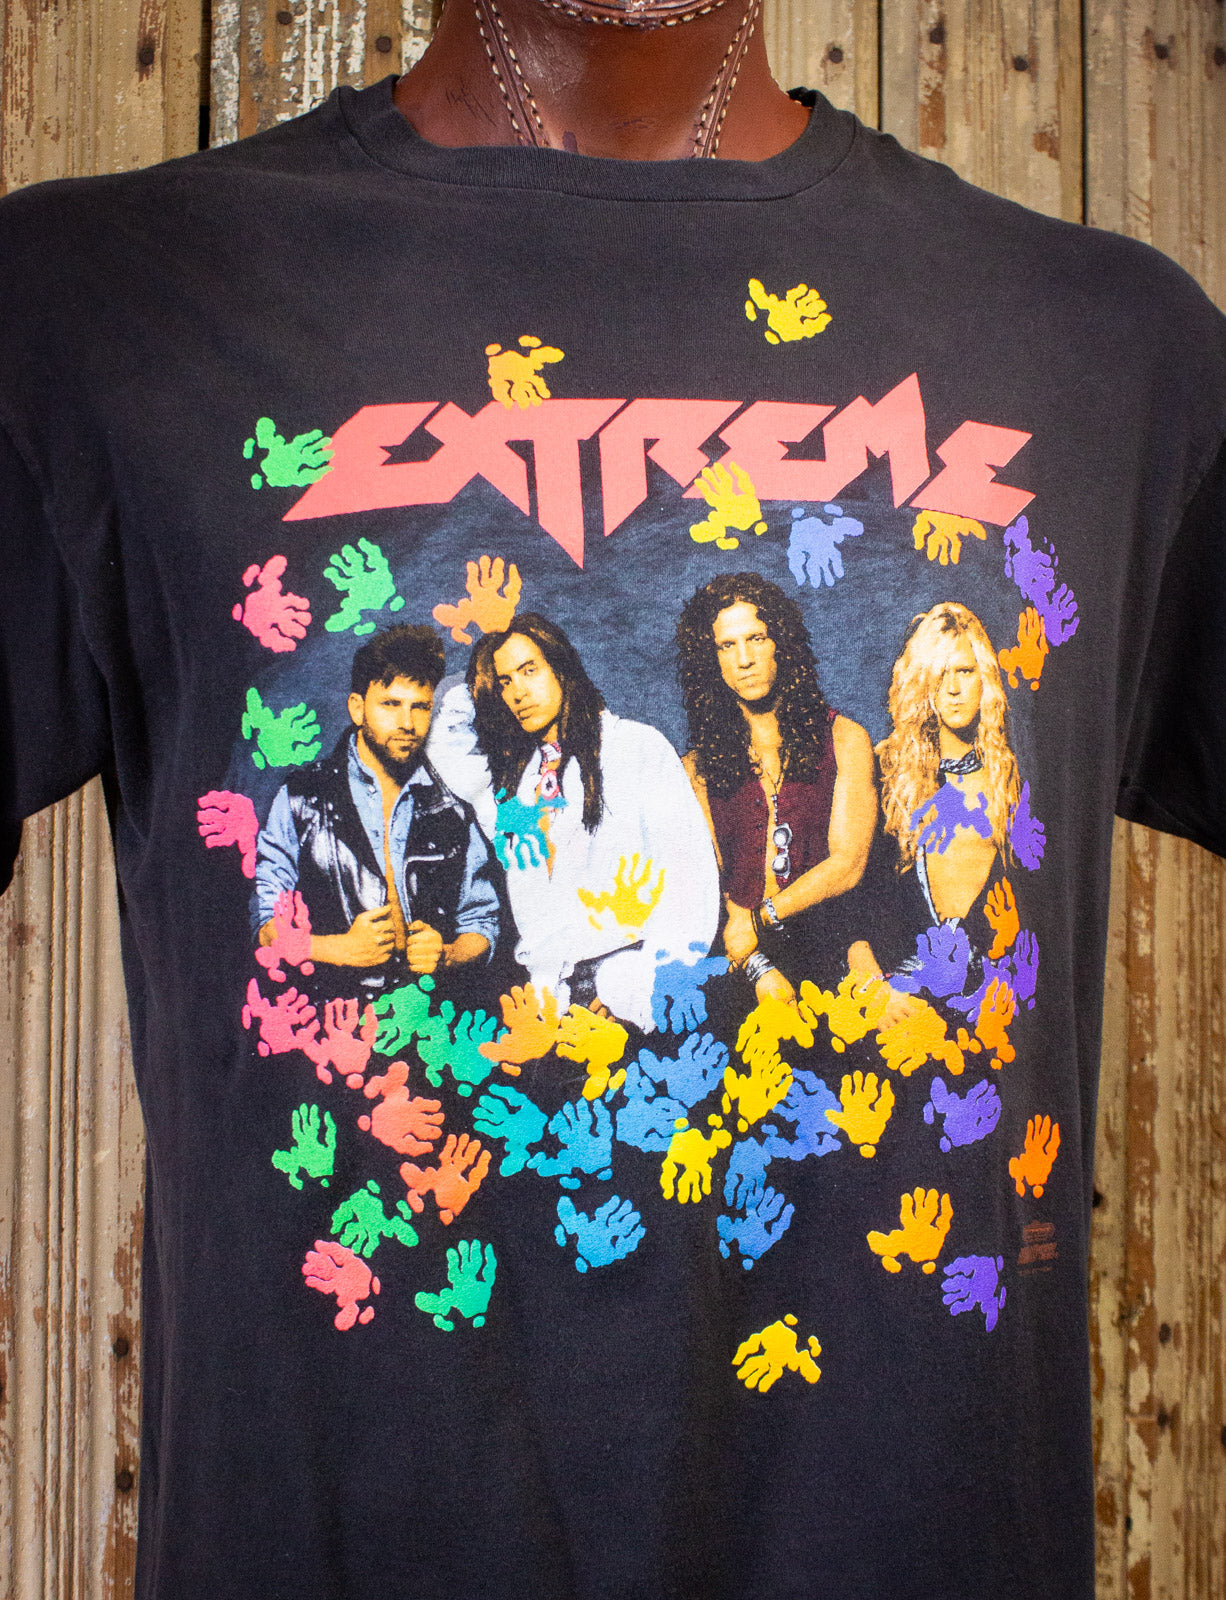 Vintage Extreme Get The Funk Out Concert T shirt 1990 XL